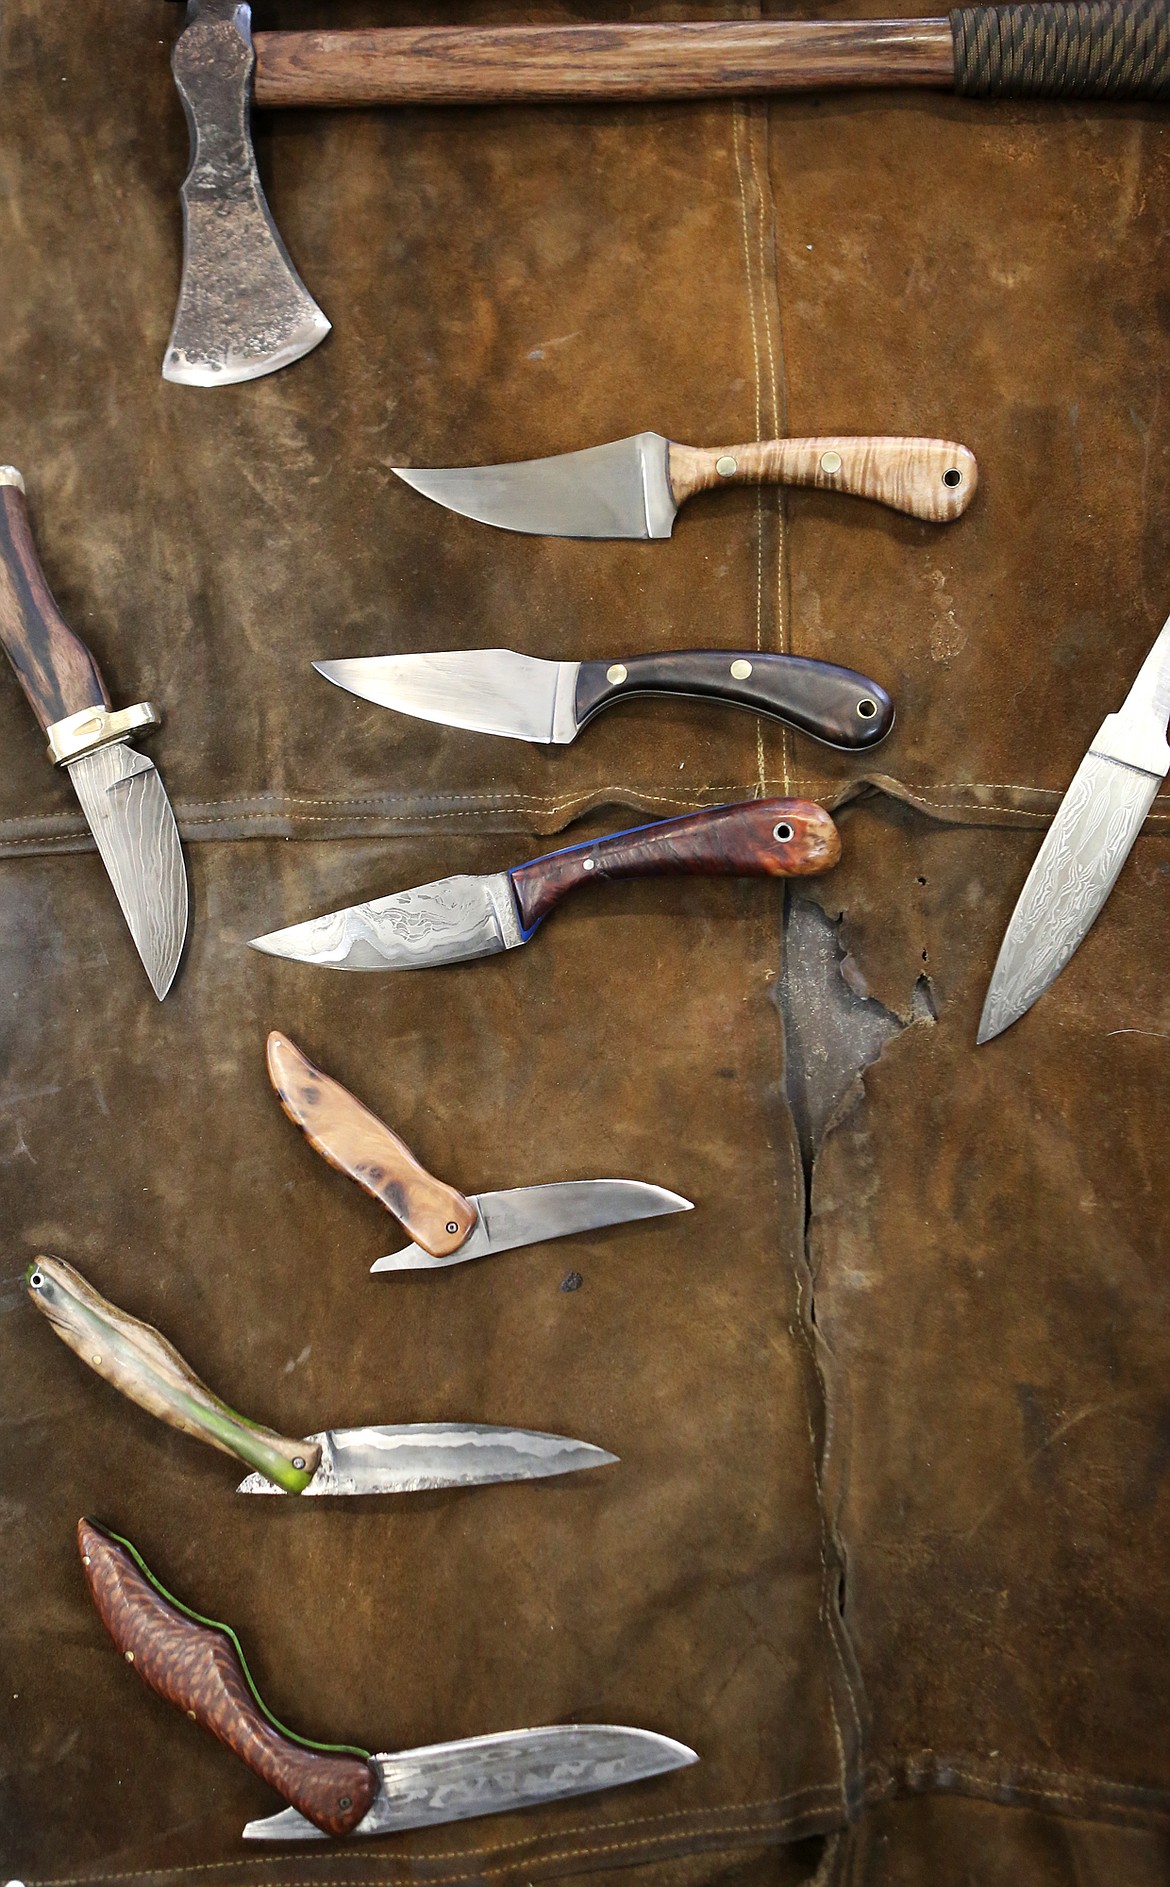 This collection of knives was handcrafted by Scott Sweder. (Mackenzie Reiss/Daily Inter Lake)